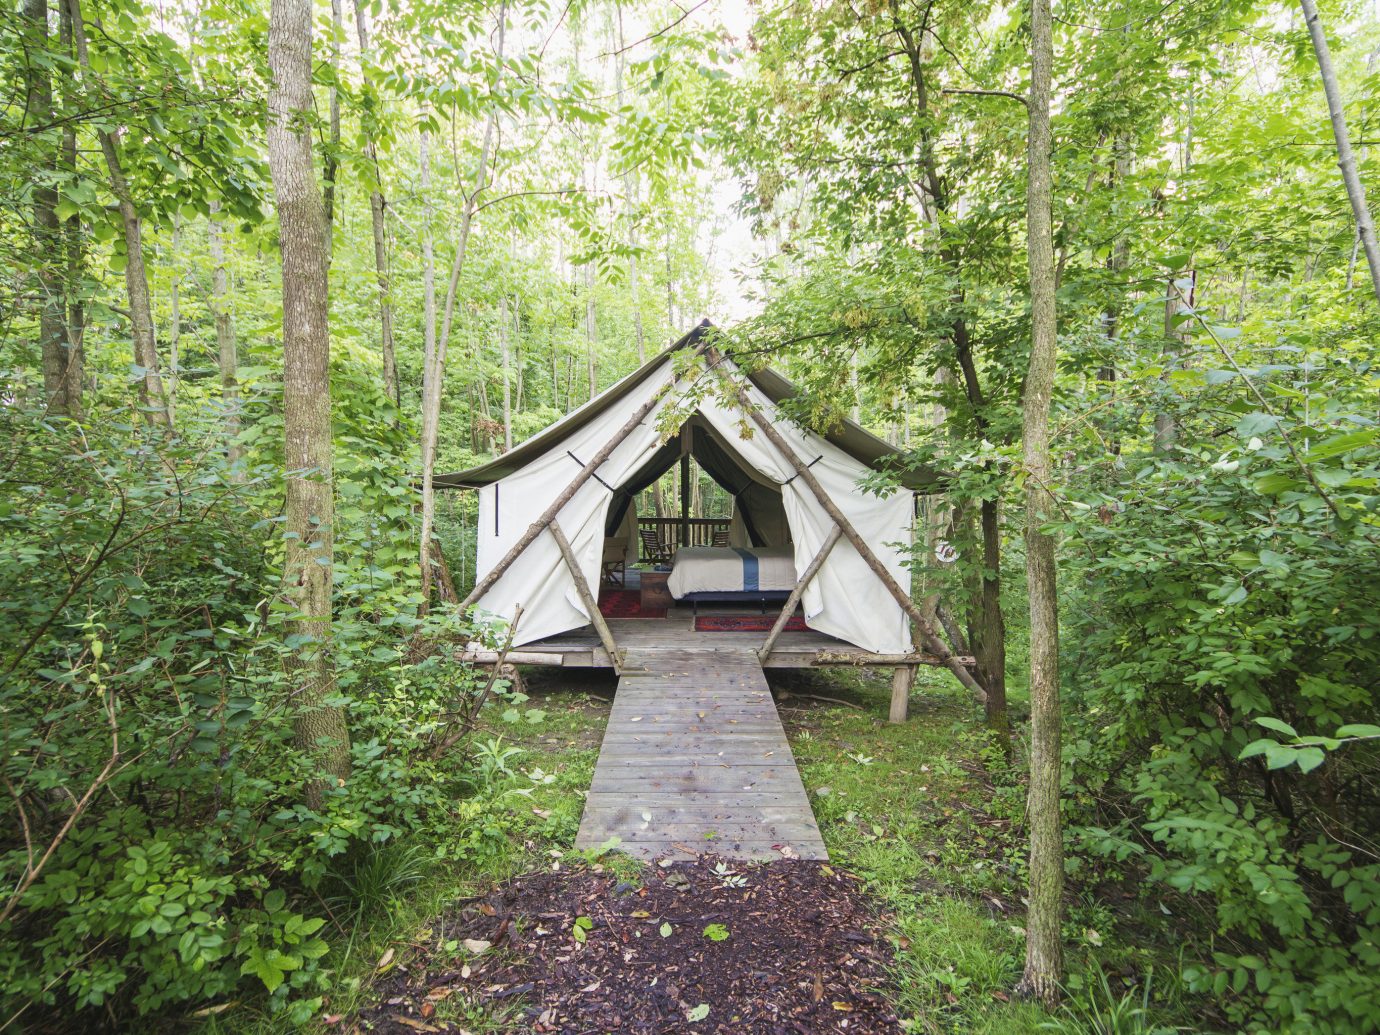 Glamping Luxury Travel Trip Ideas tree outdoor grass nature reserve path Forest vegetation woodland building wood Jungle rainforest old growth forest plant trail real estate cottage hut house state park wooded area lush surrounded Garden stone